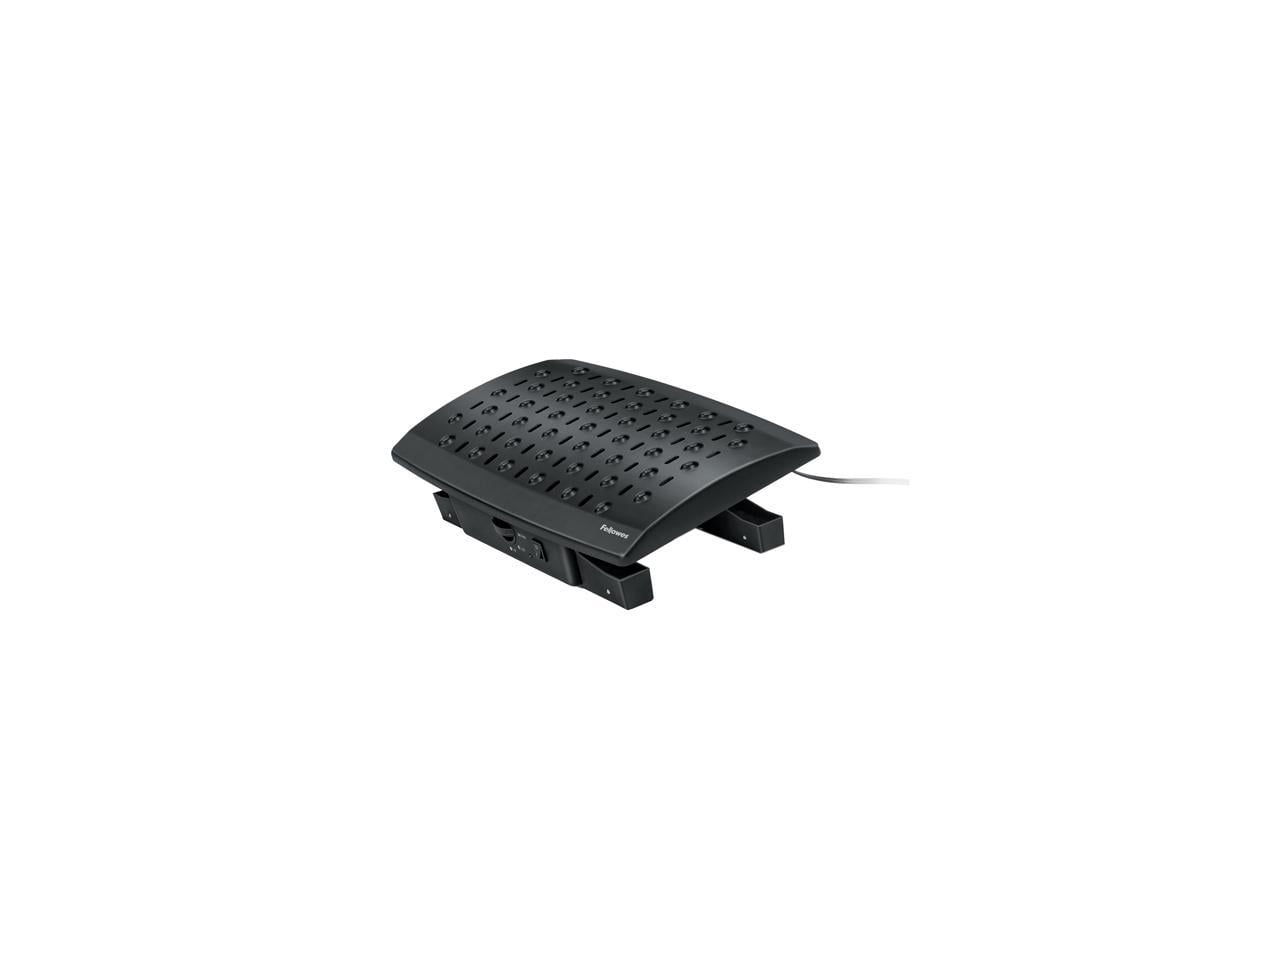 Climate Control Footrests Recalled by Fellowes Due to Fire Hazard